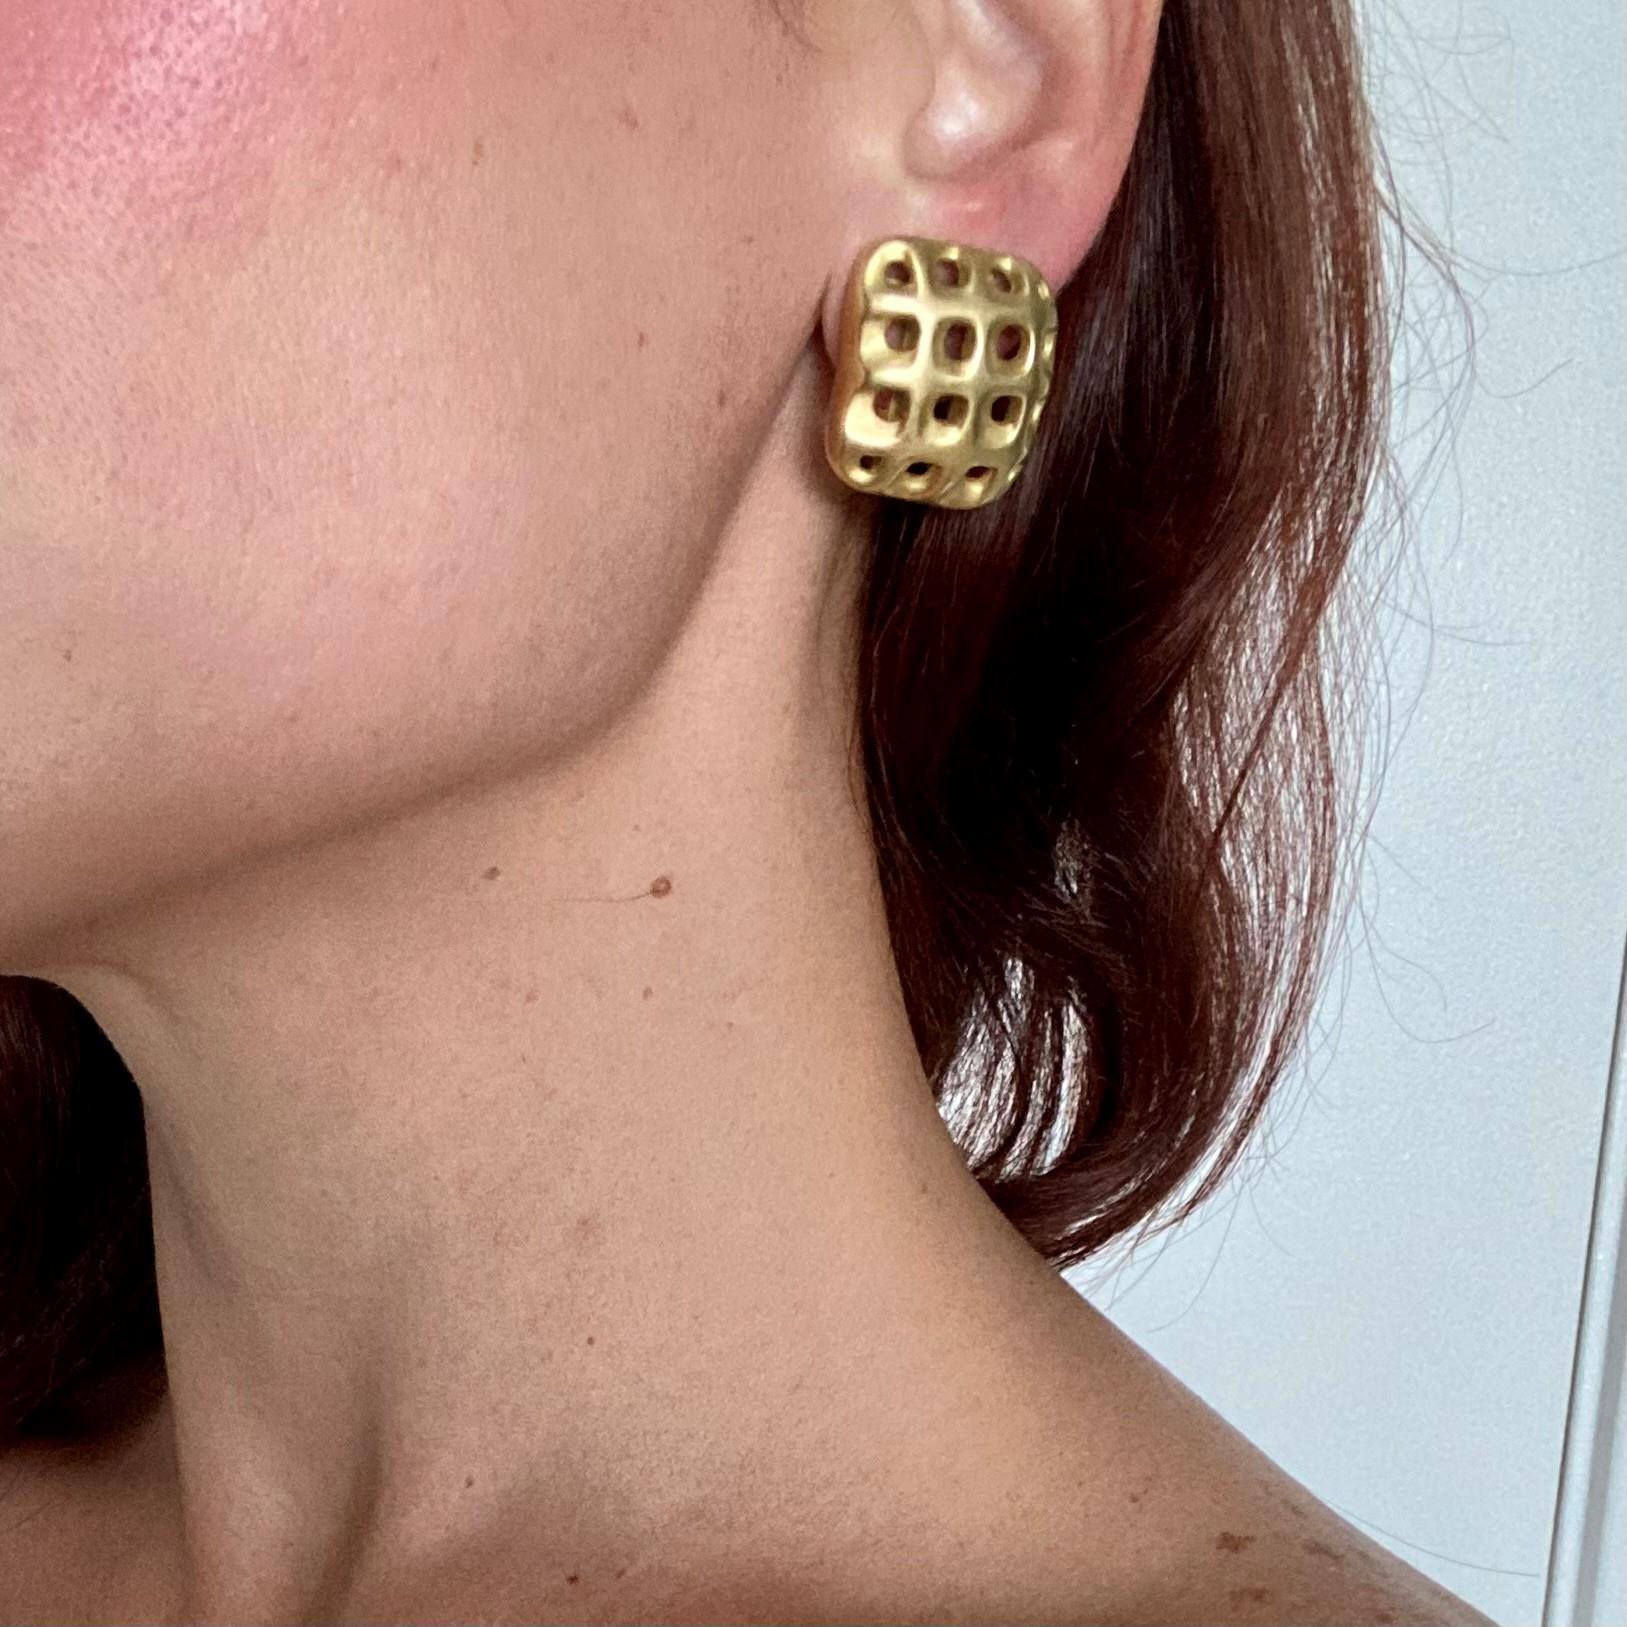 Angela Cummings 1987 New York Studios Perforations Earrings In Solid 18Kt Gold For Sale 2